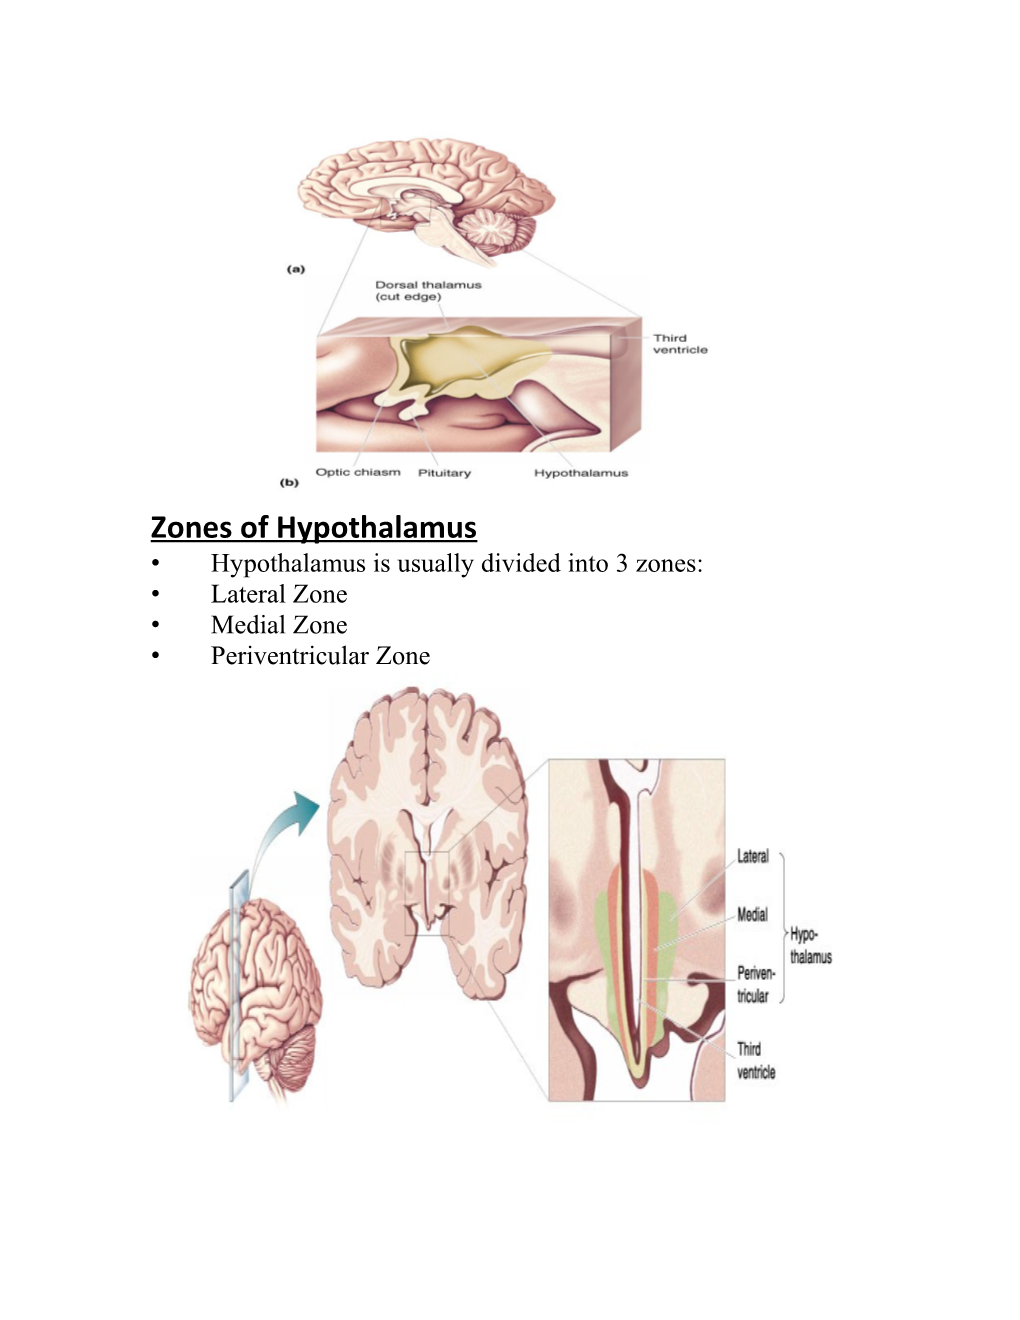 Physiology of the Hypothalamus